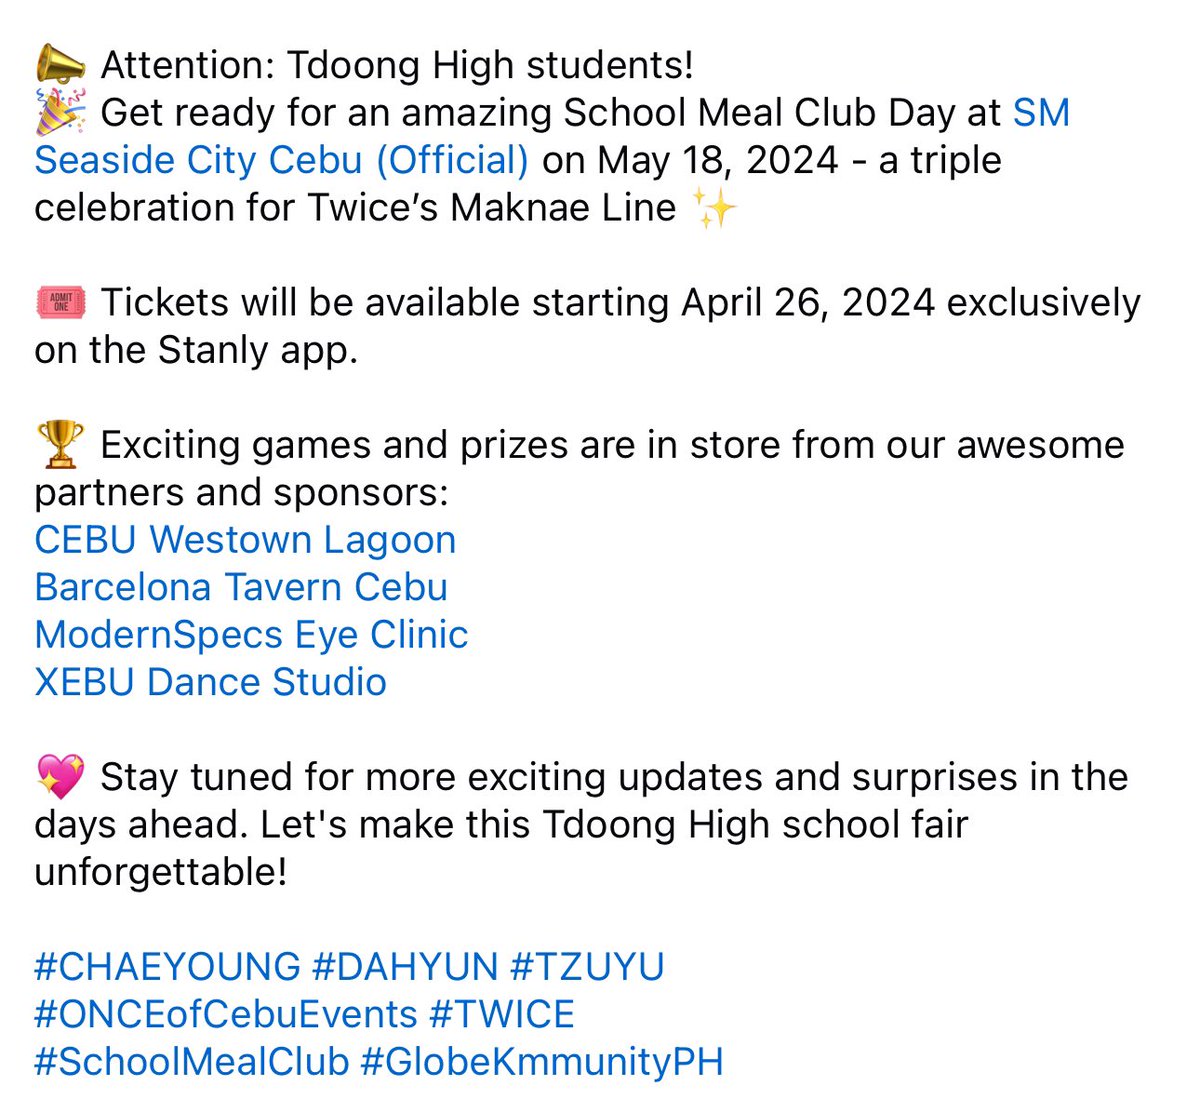 📣 Attention: Tdoong High! 
🎉 Get ready for an amazing School Meal Club Day - a triple celebration for Twice’s Maknae Line ✨

🎟️ Tickets will be available starting Apr 26, 2024 exclusively on the Stanly app. 

#CHAEYOUNG #DAHYUN #TZUYU
#ONCEofCebuEvents #TWICE
#GlobeKmmunityPH